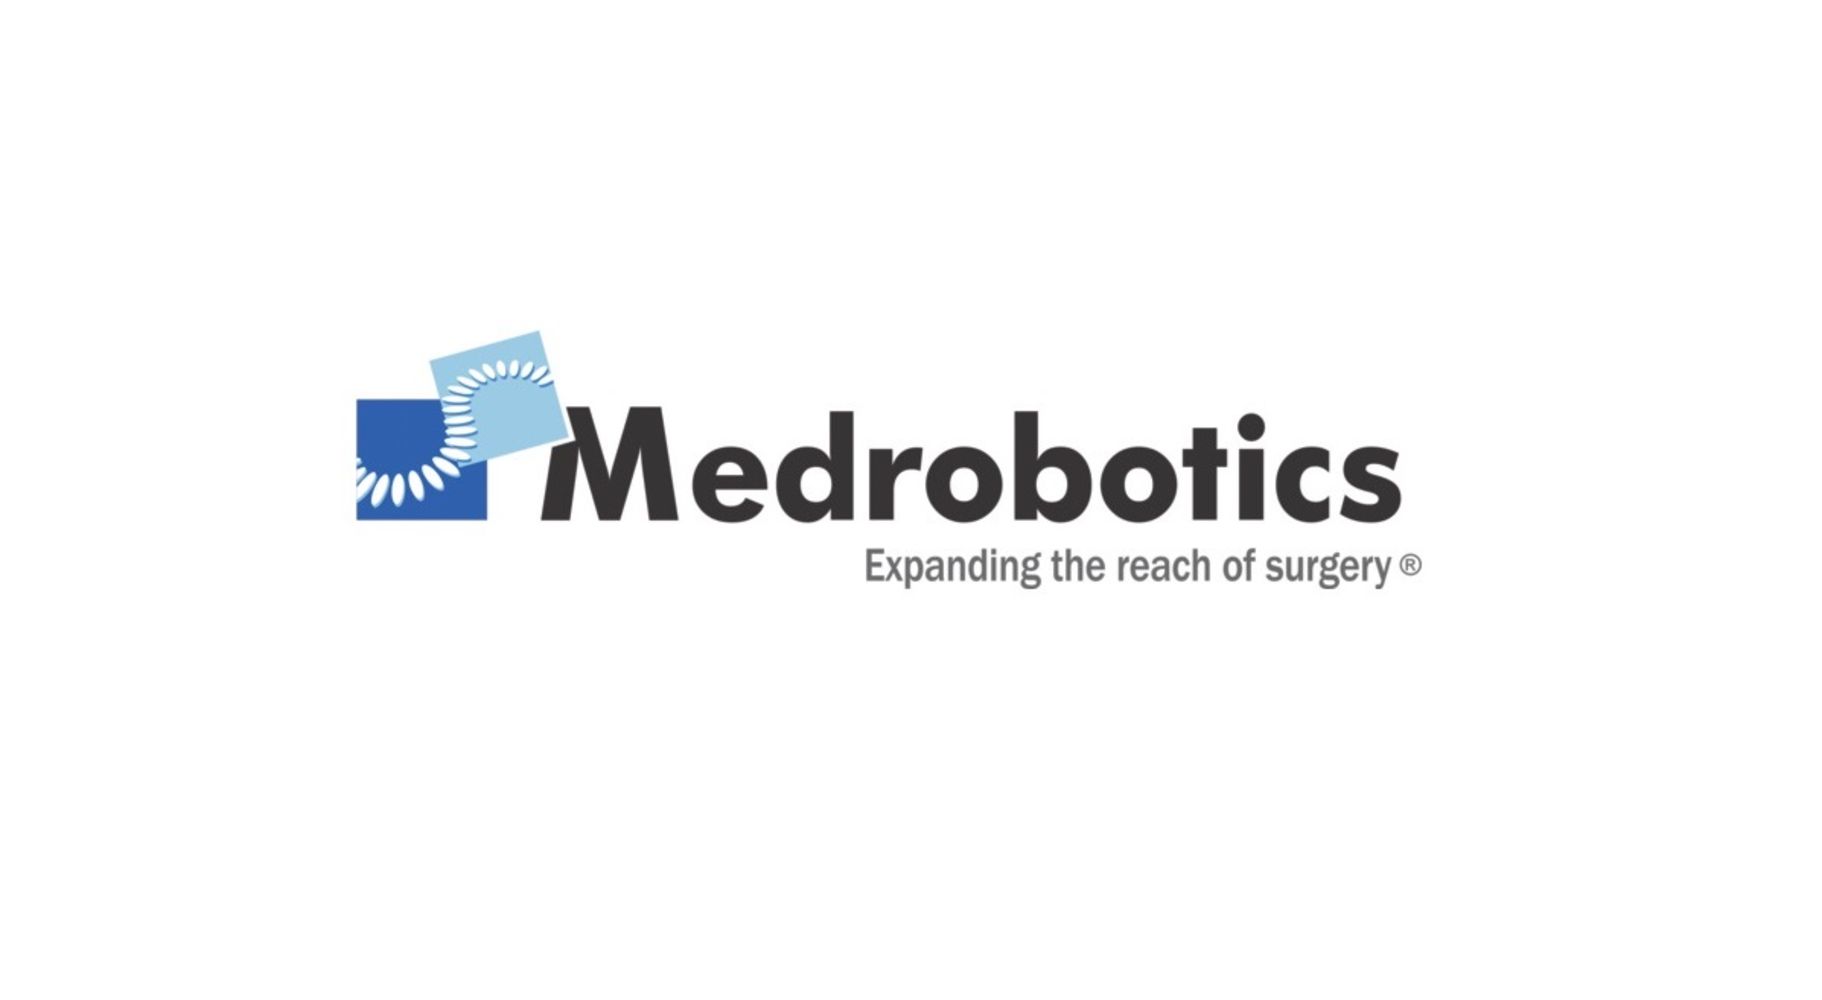 OVER 40,000 SQ FT FACILITY: ROBOTIC SURGICAL DEVICE MANUFACTURER